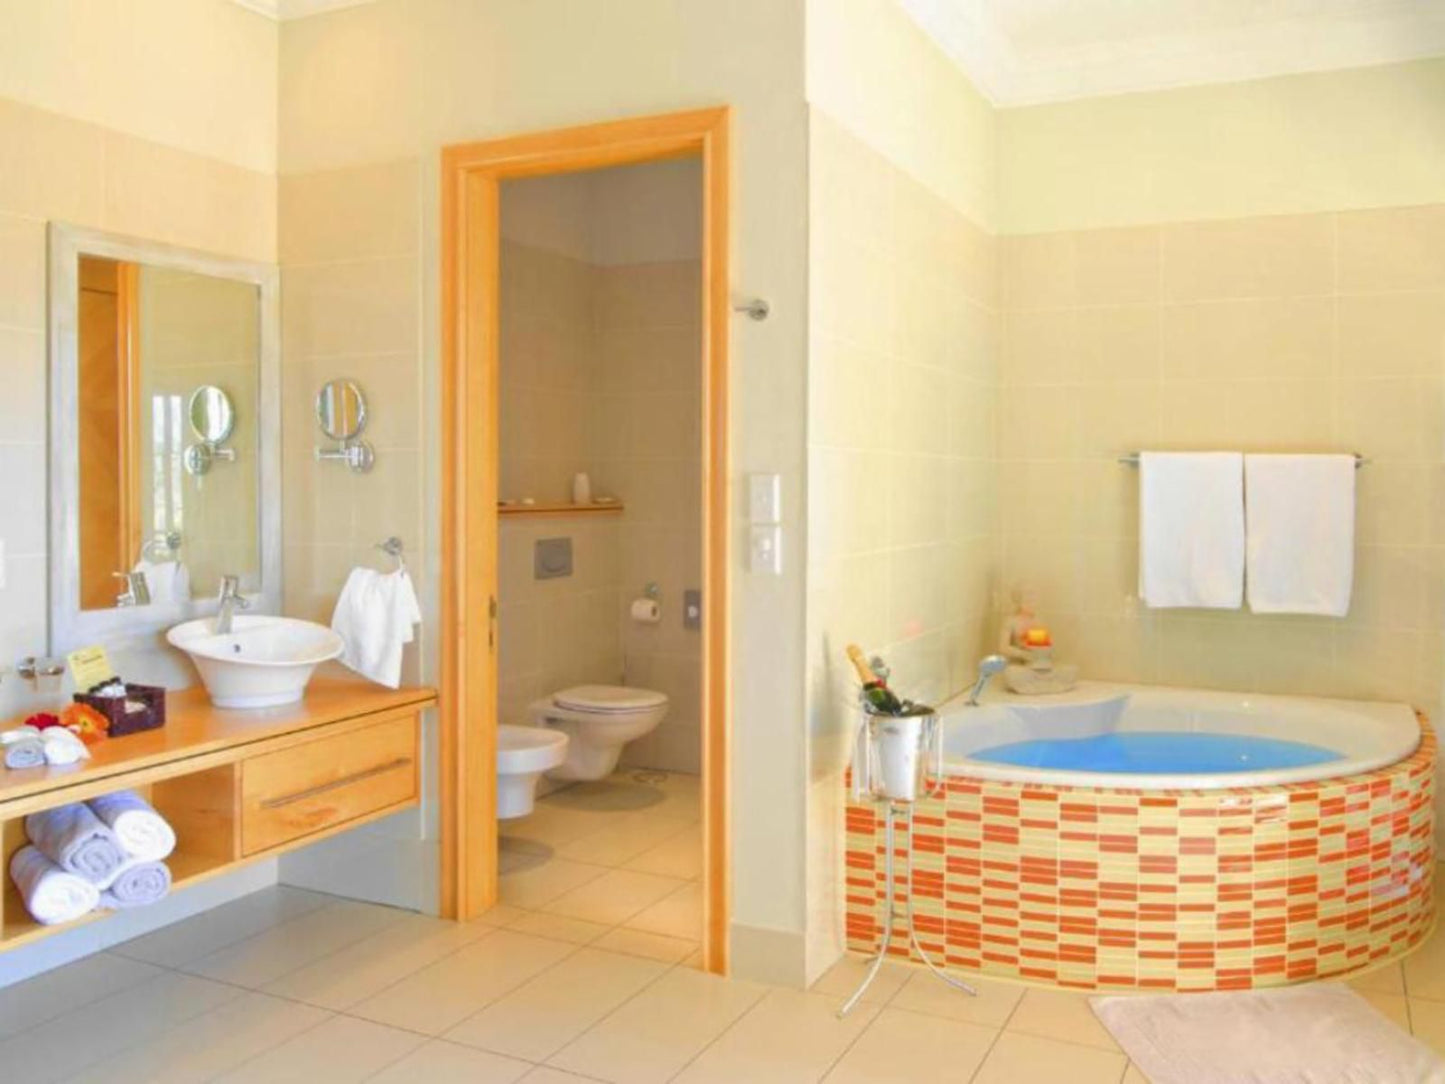 Schneider S Boutique Hotel Guesthouse White River Mpumalanga South Africa Bathroom